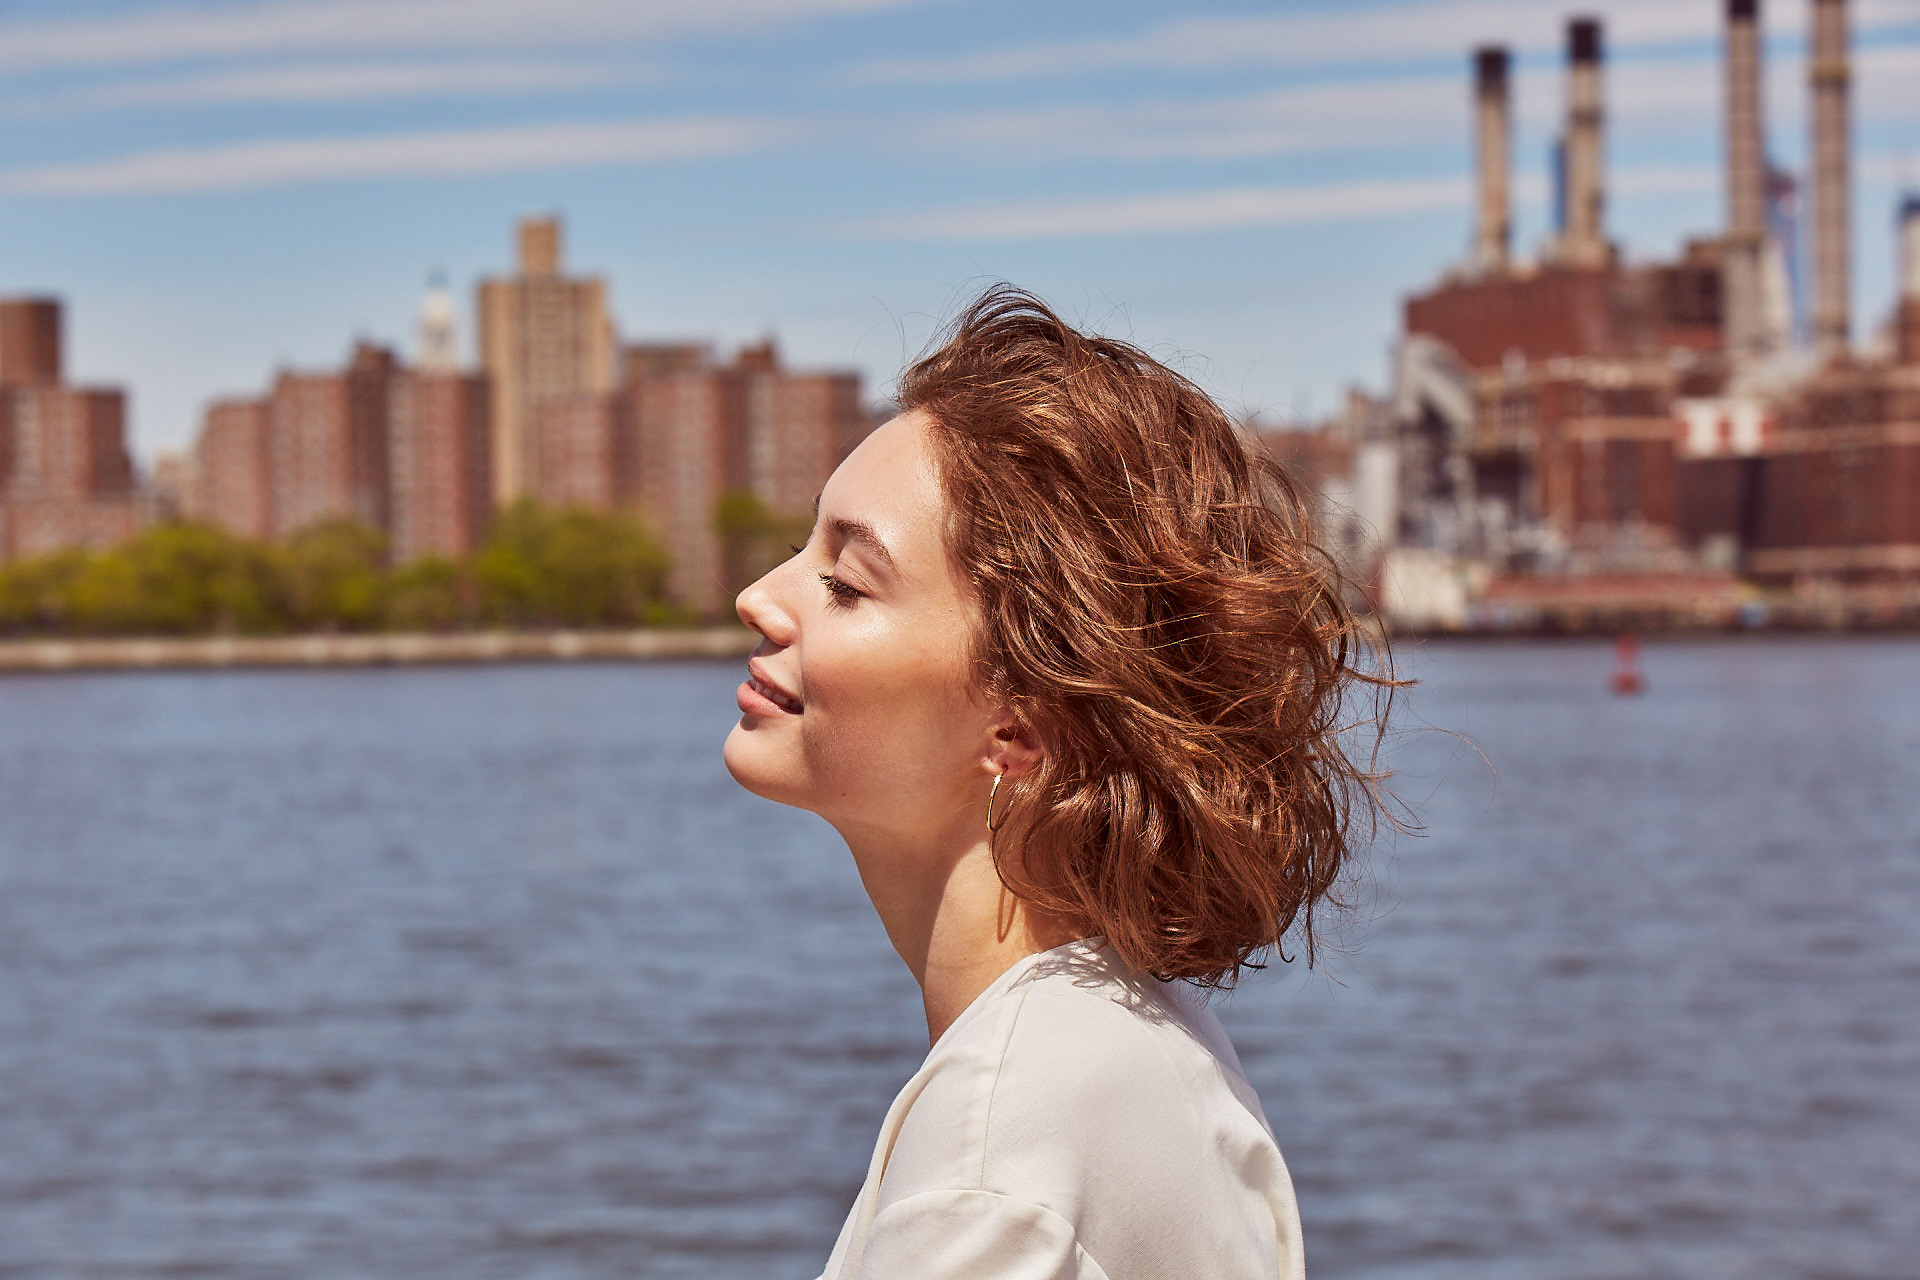 Side profile of a smiling woman in front of the water with background view of the city.